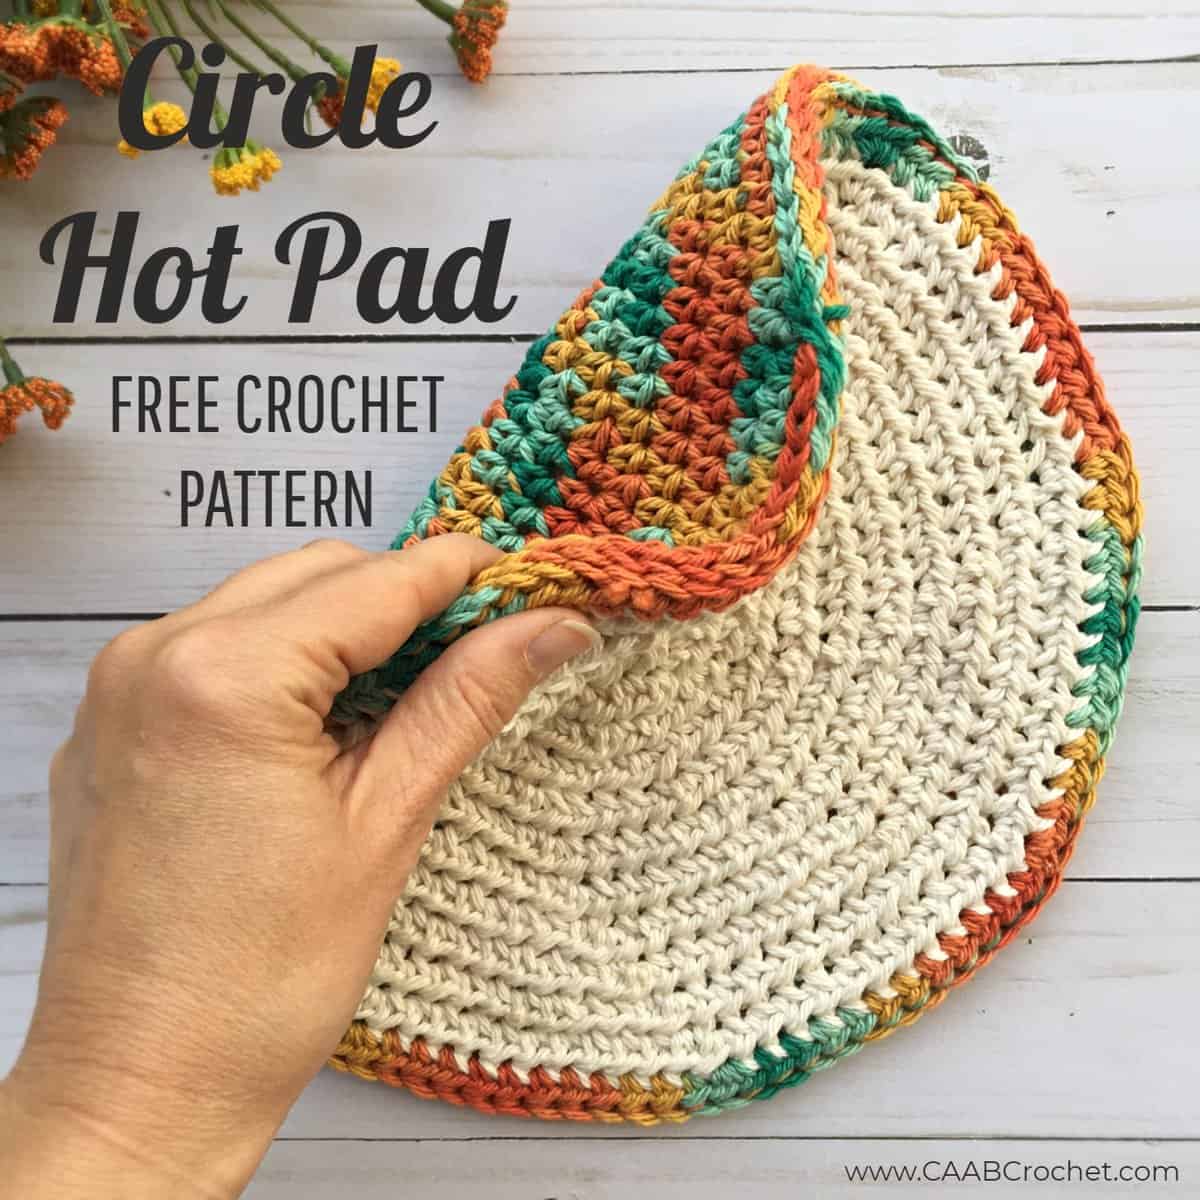 14 Cute DIY Potholders To Sew Or Crochet - Shelterness